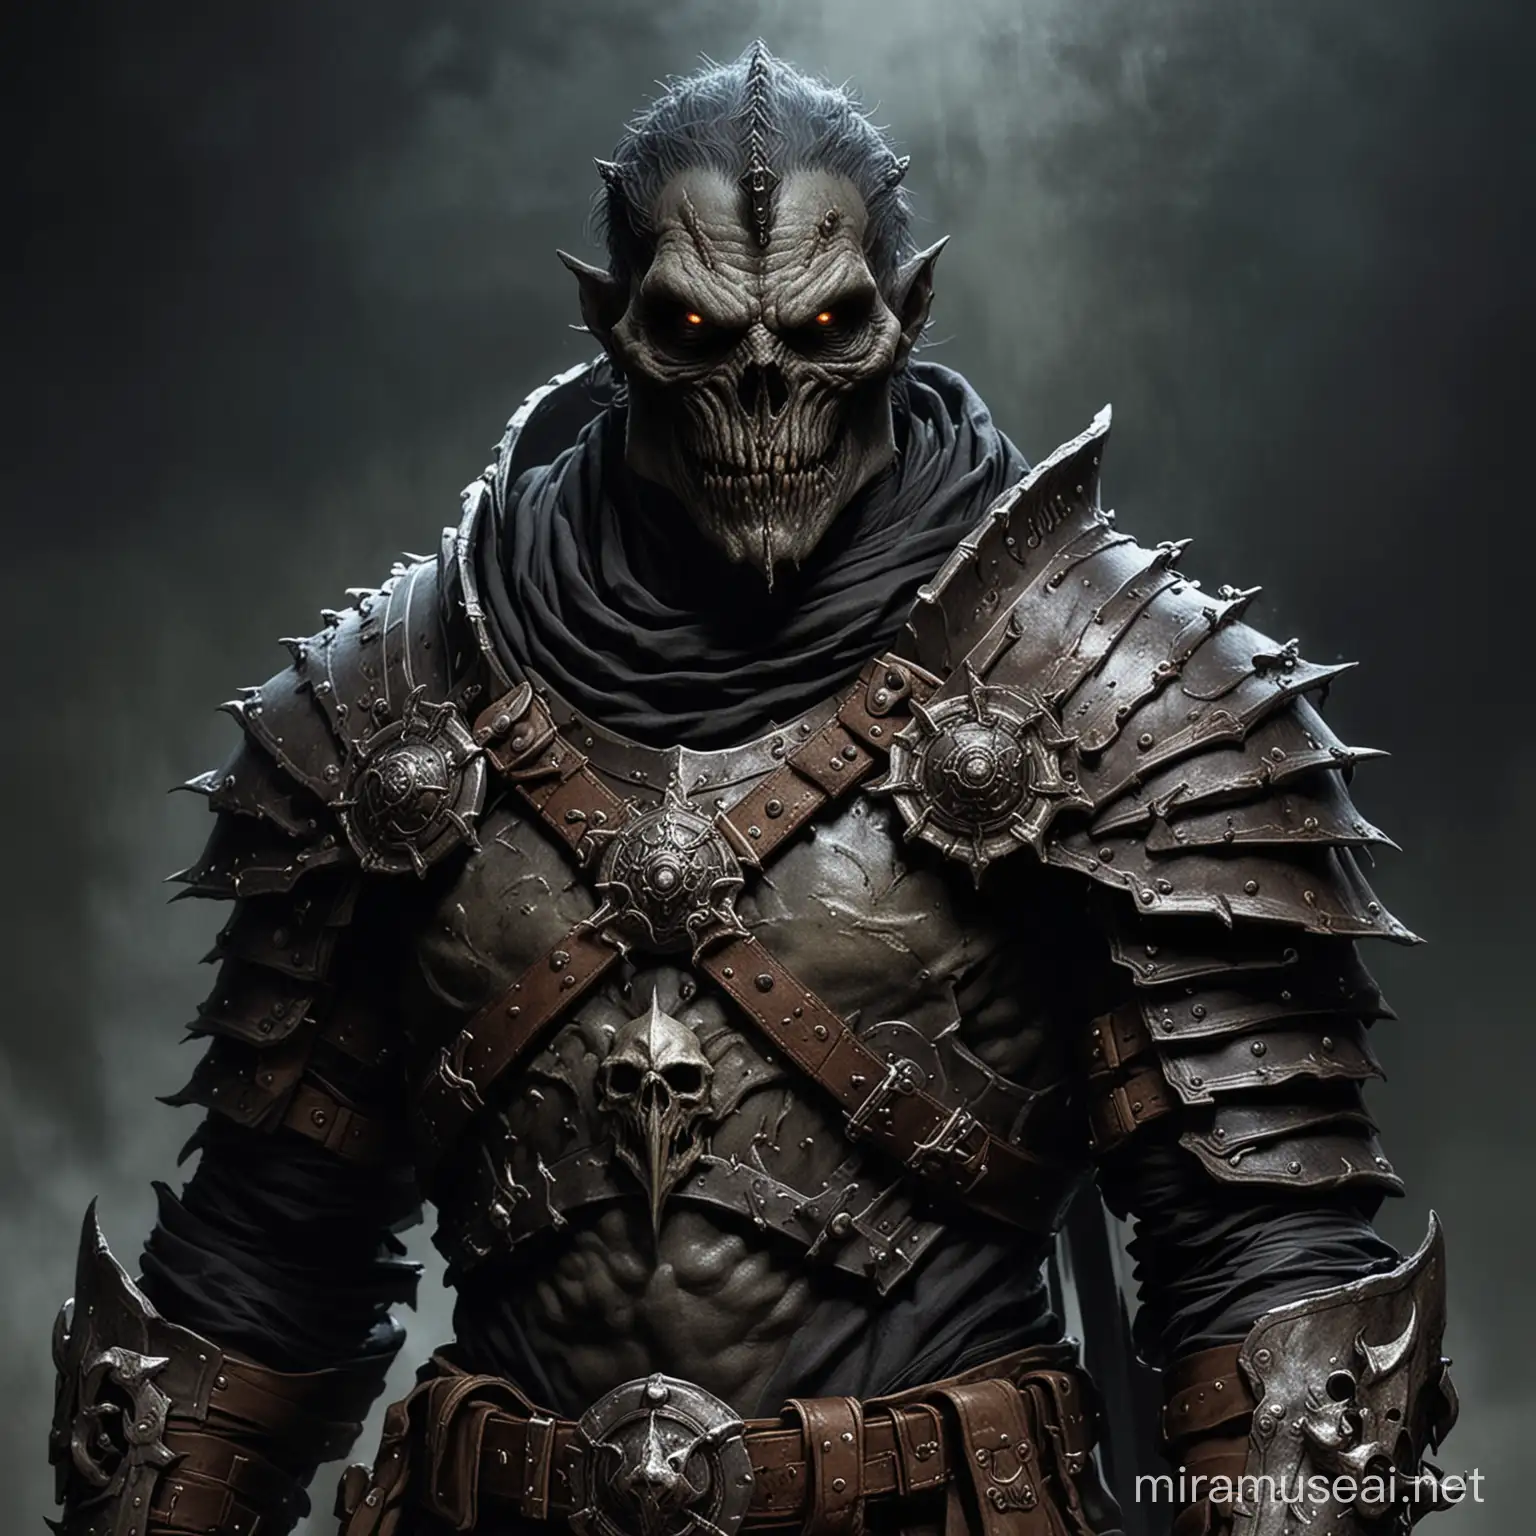 Detailed body shot Monster. In the style of Gerald Brom. Wearing standard medieval infantry gear. Fantasy painting. Creepy. Dark. Brooding. Ominous. 